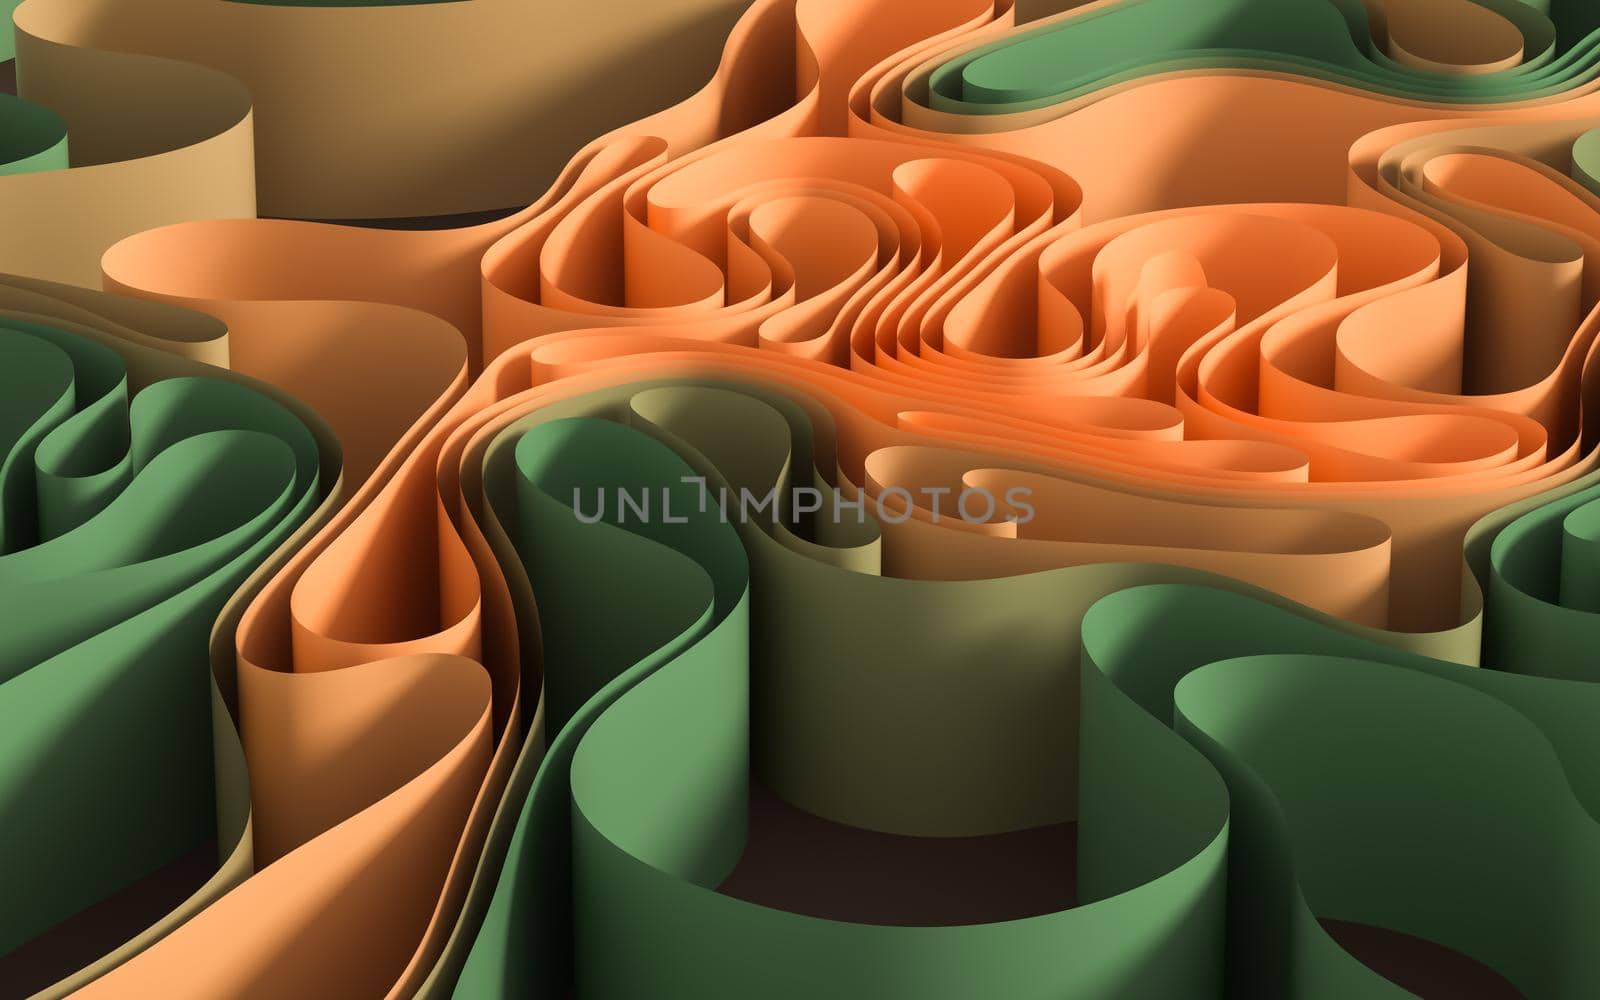 Curve the flow of the paper, 3d rendering. by vinkfan